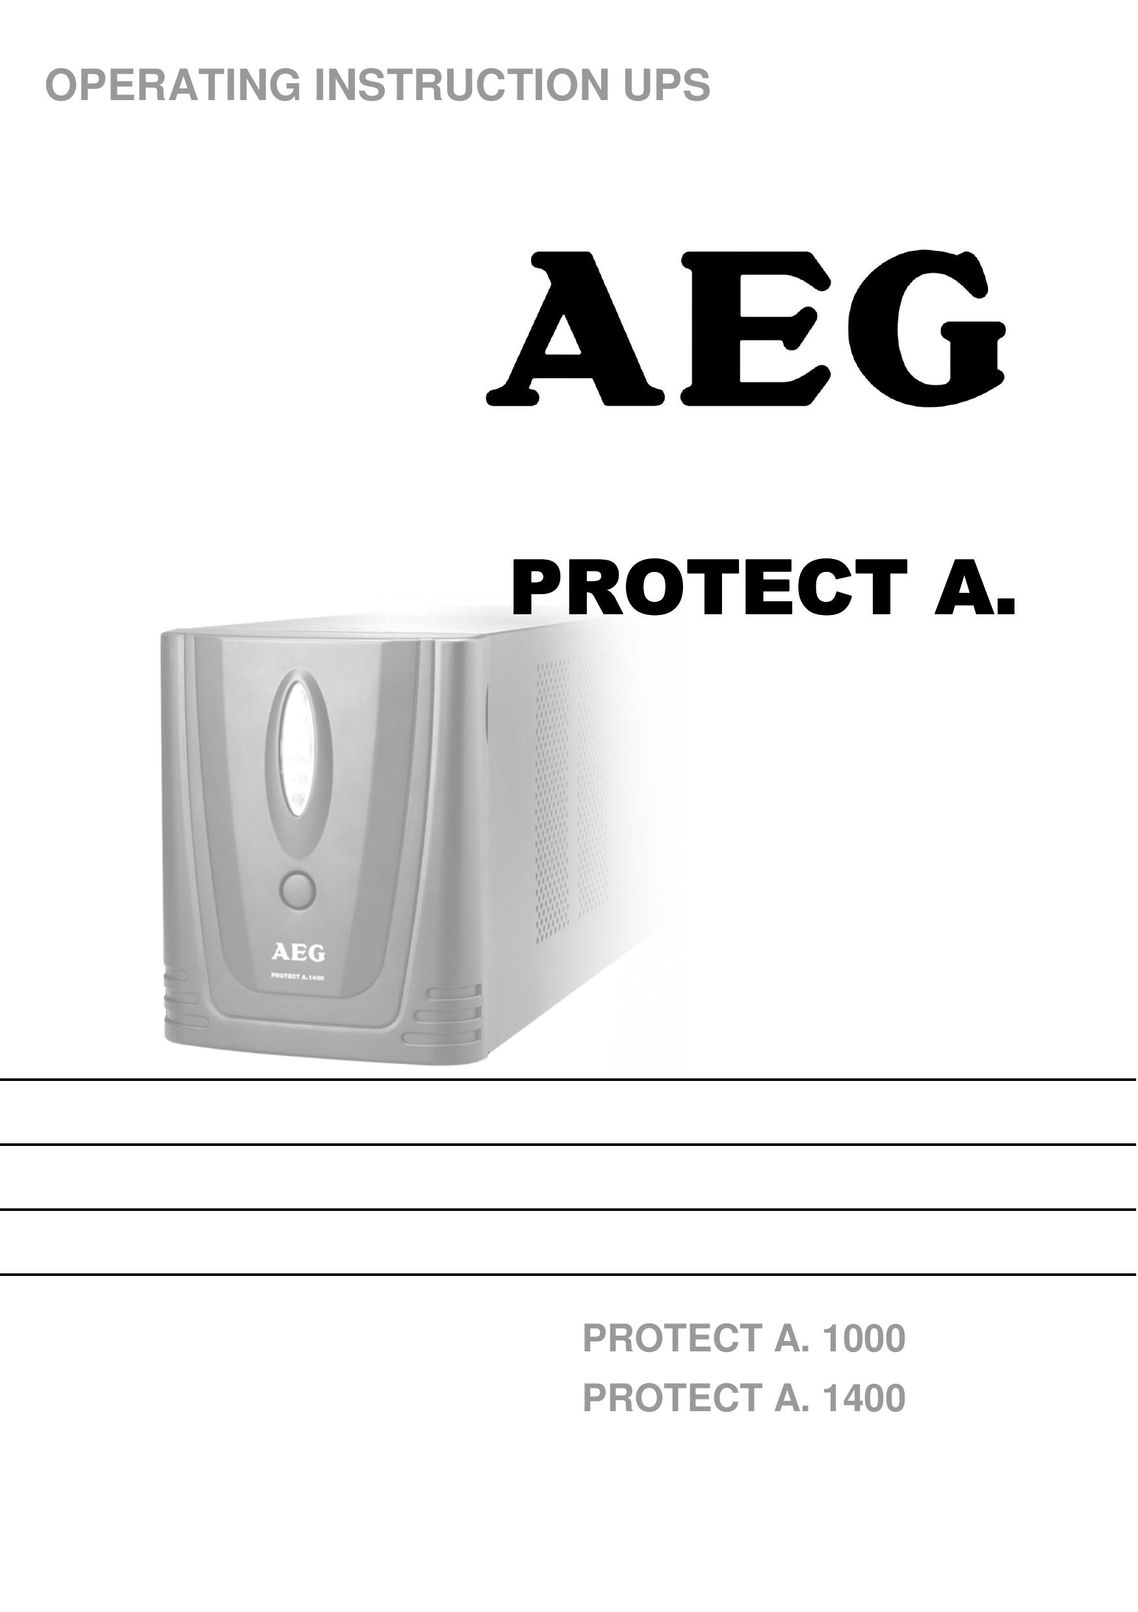 AEG PROTECT A Power Supply User Manual